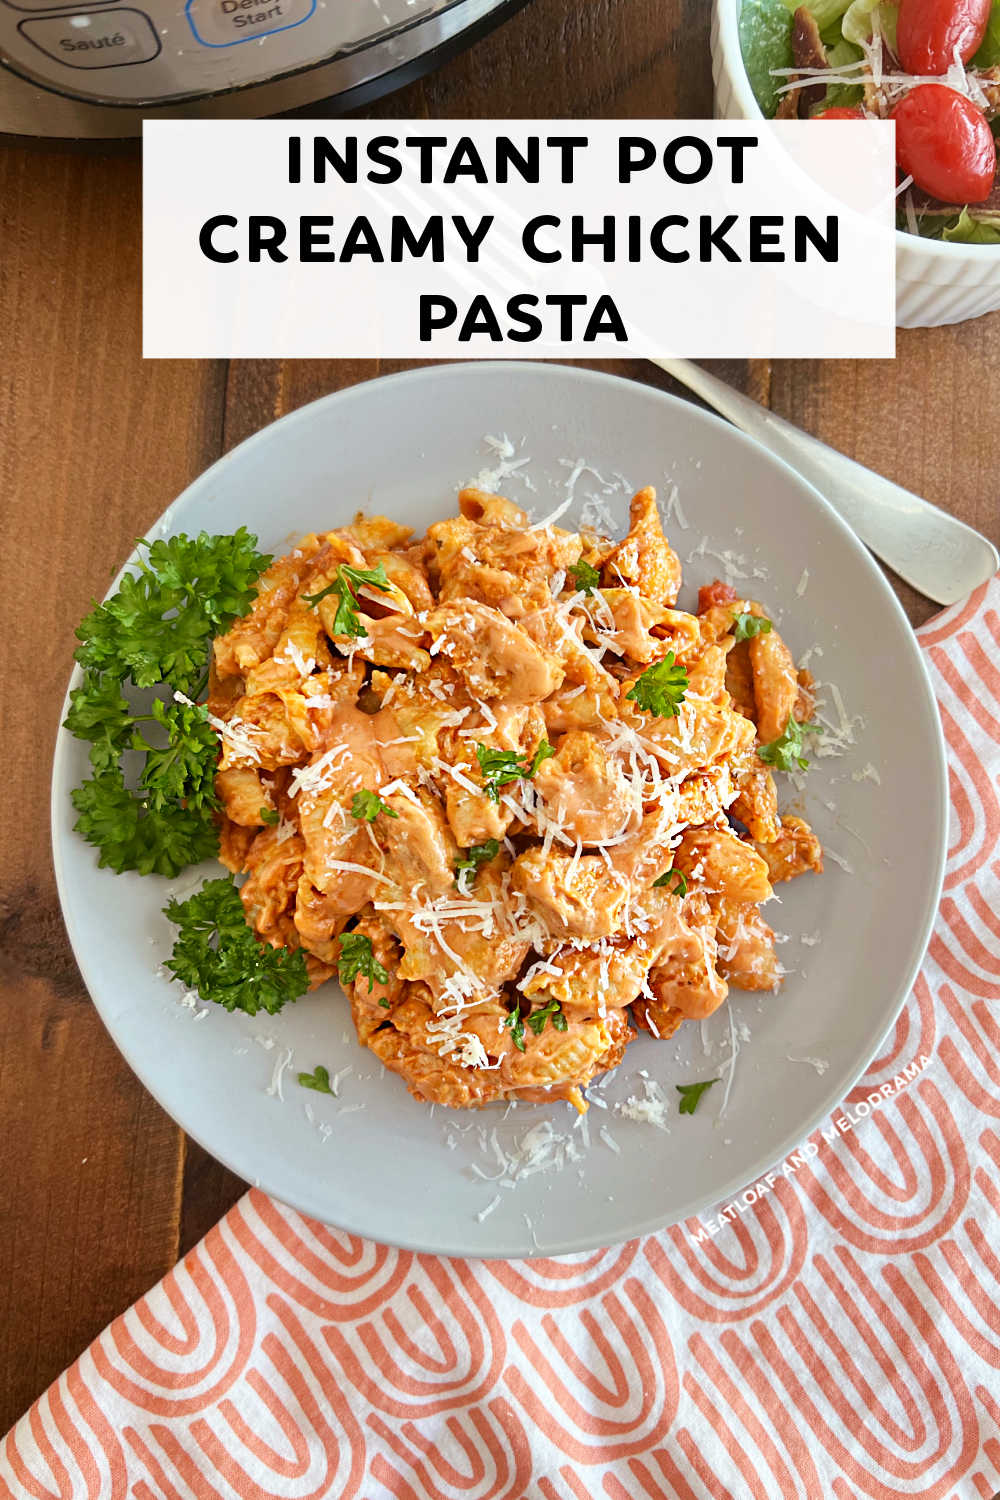 Instant Pot Creamy Chicken Pasta is an easy dinner recipe made with tender chicken and pasta shells in a delicious creamy sauce. This Instant Pot chicken pasta is an easy one pot meal perfect for busy weeknights that your whole family will love! via @meamel